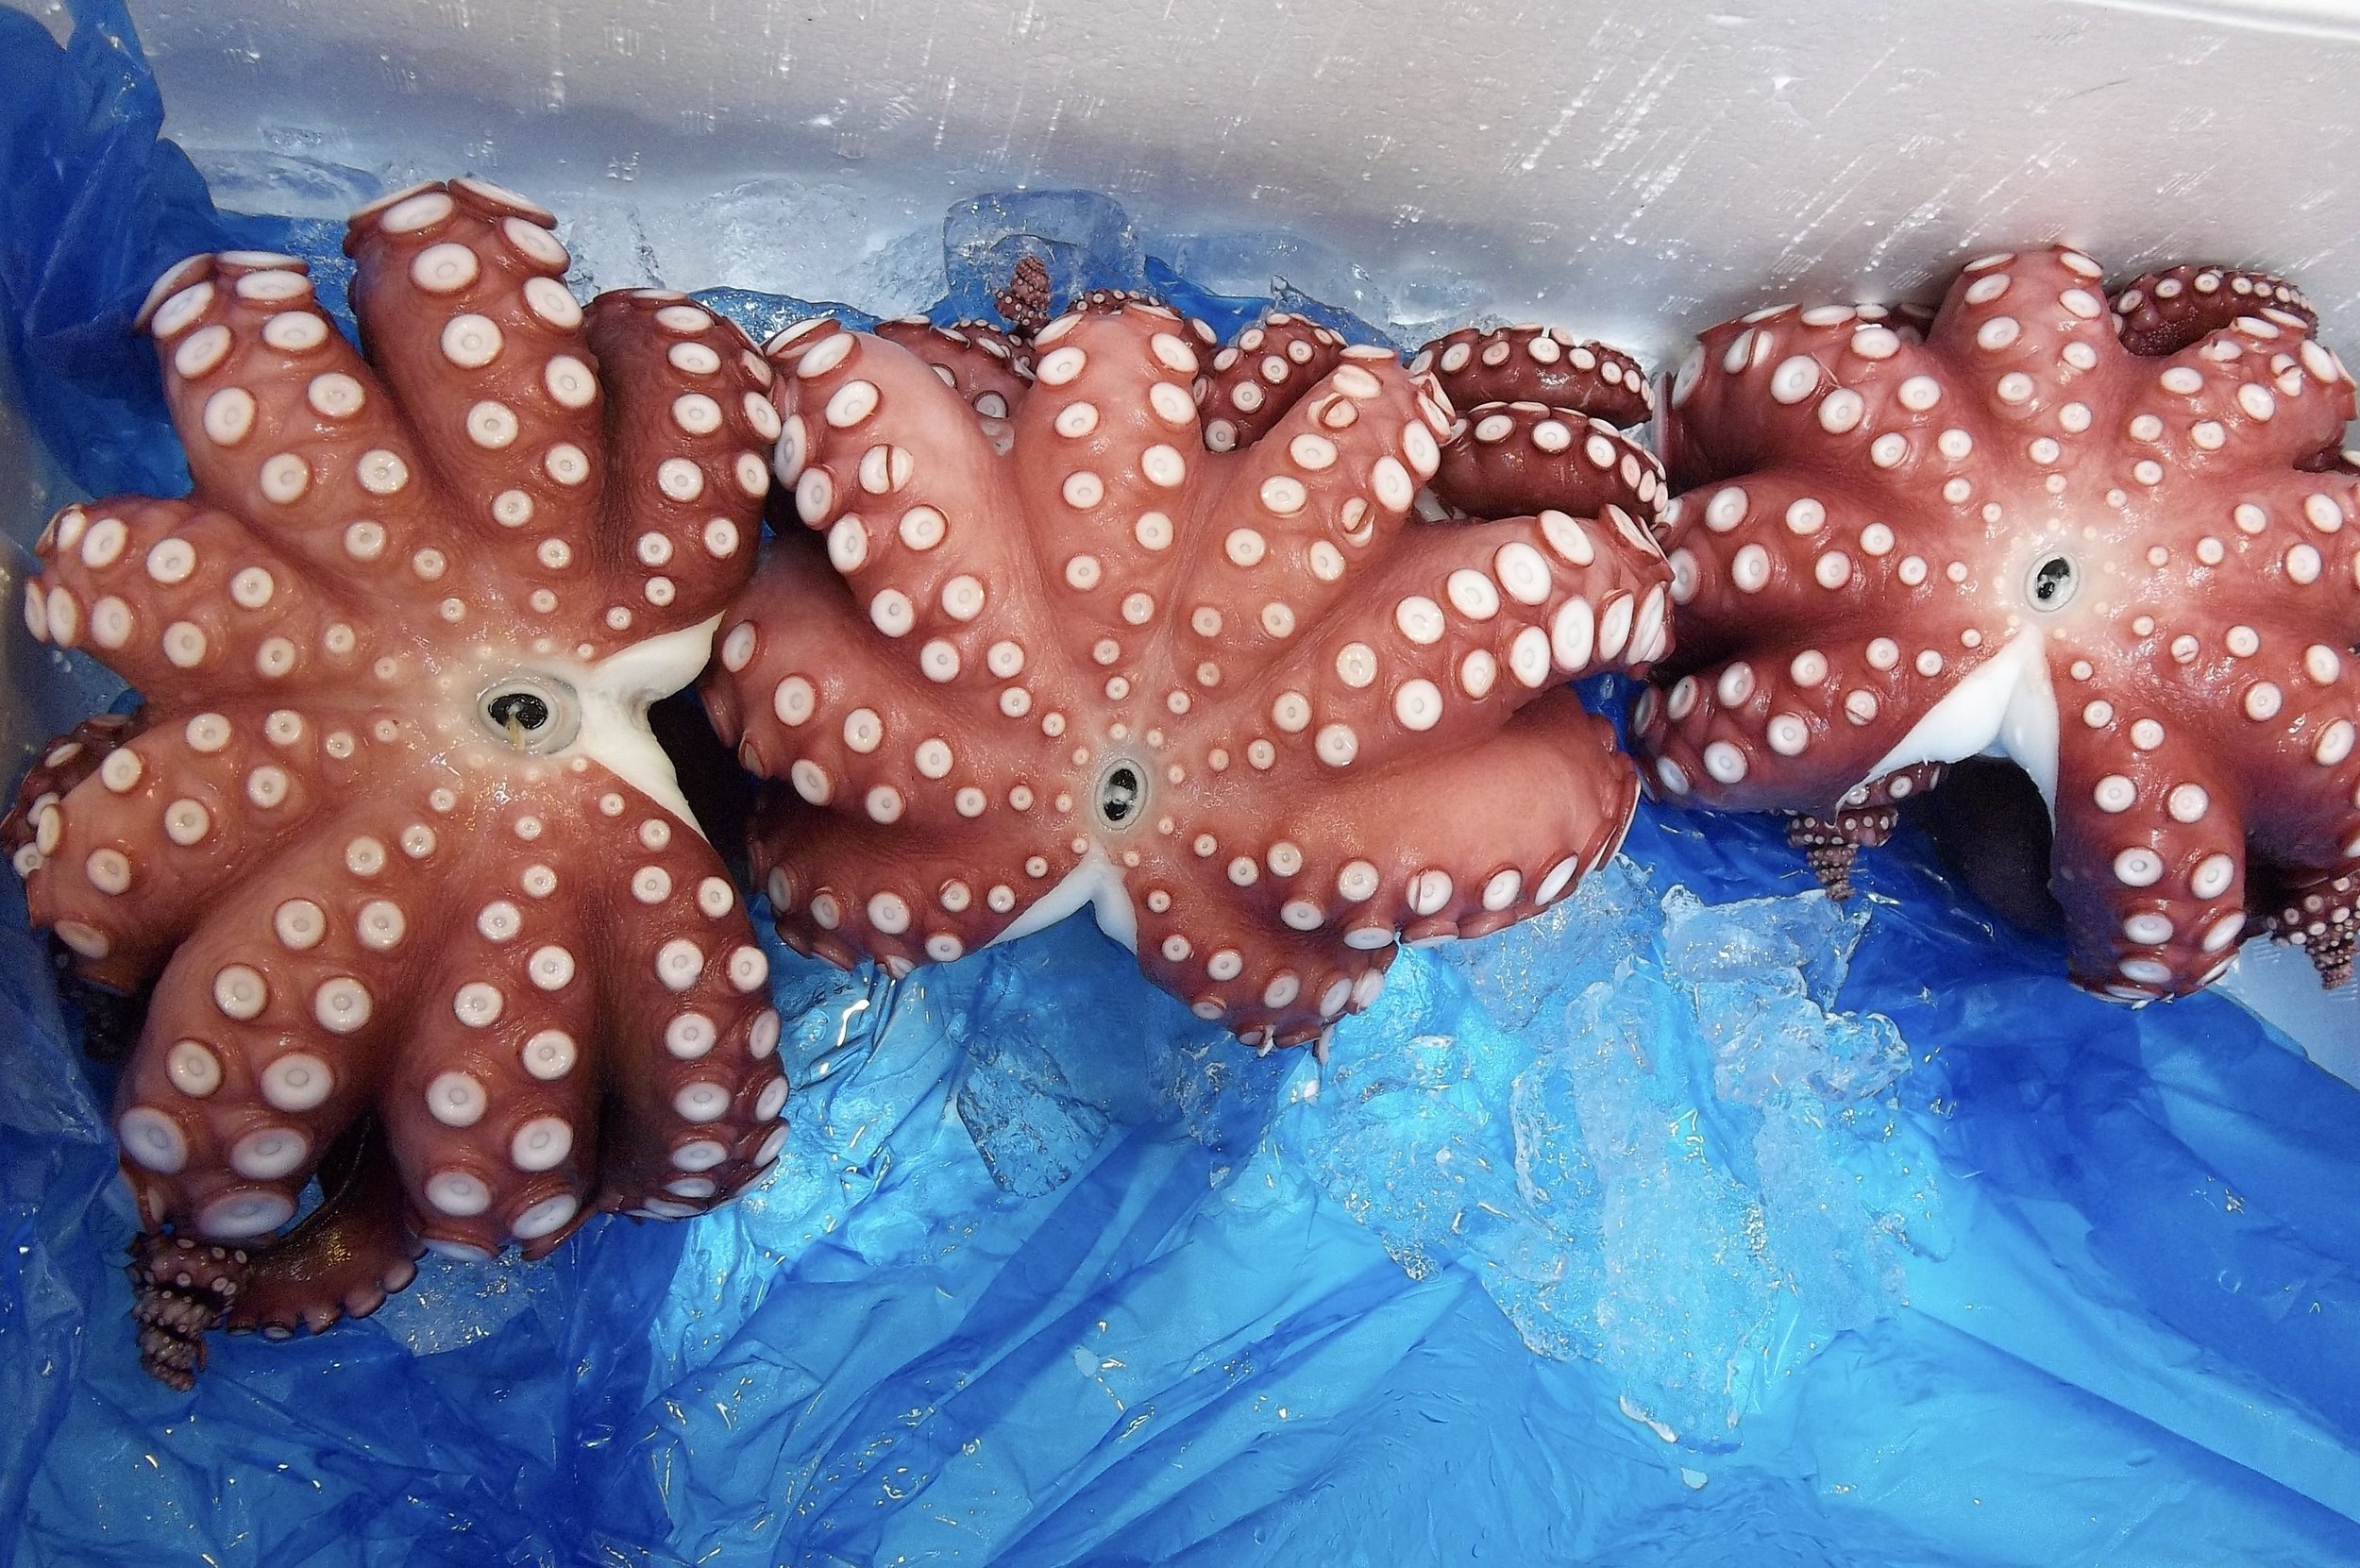 Octopus for sale